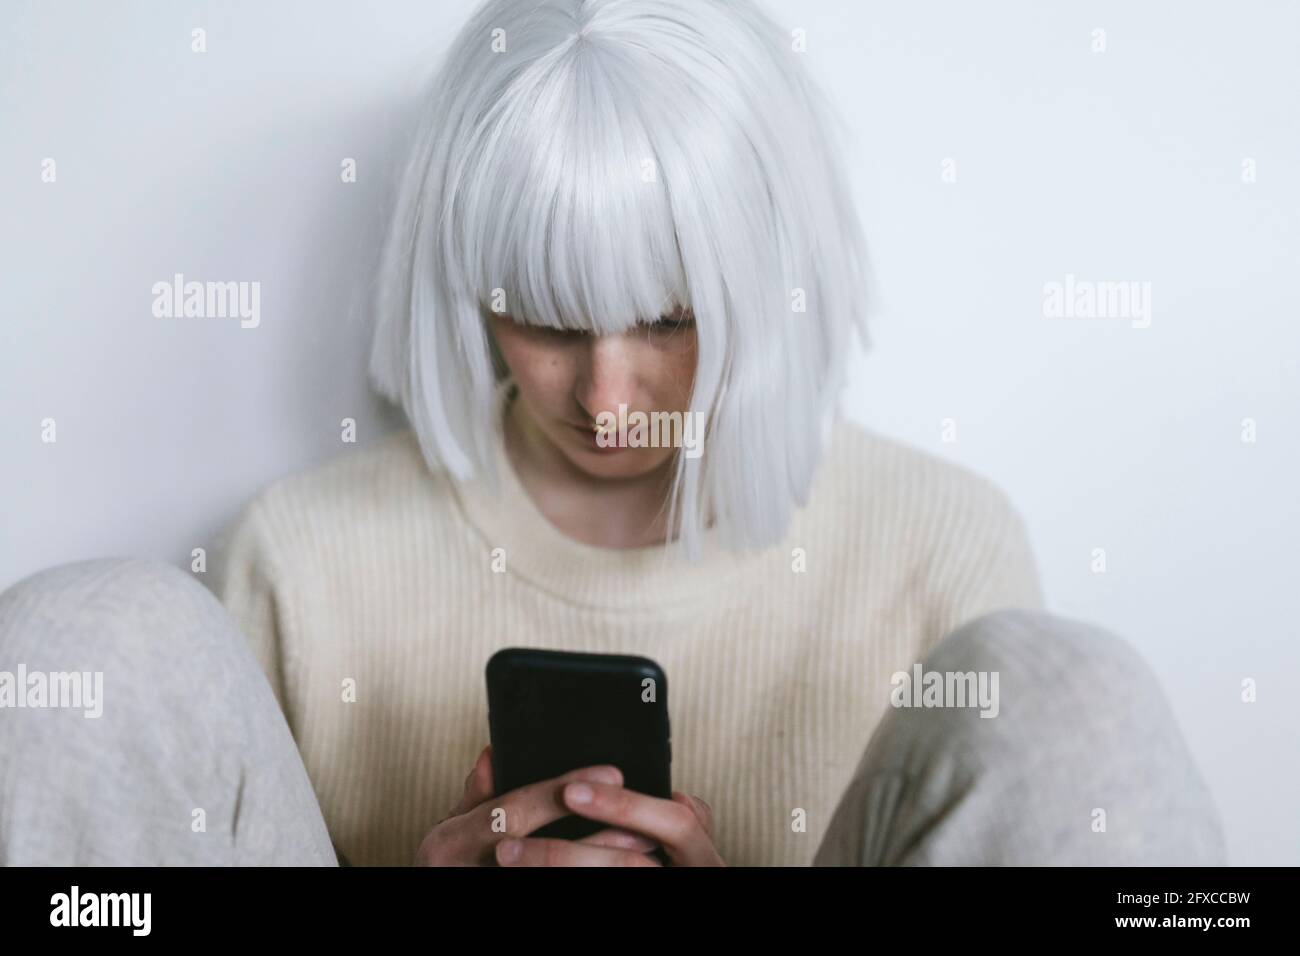 Mid adult woman with bangs using mobile phone Stock Photo